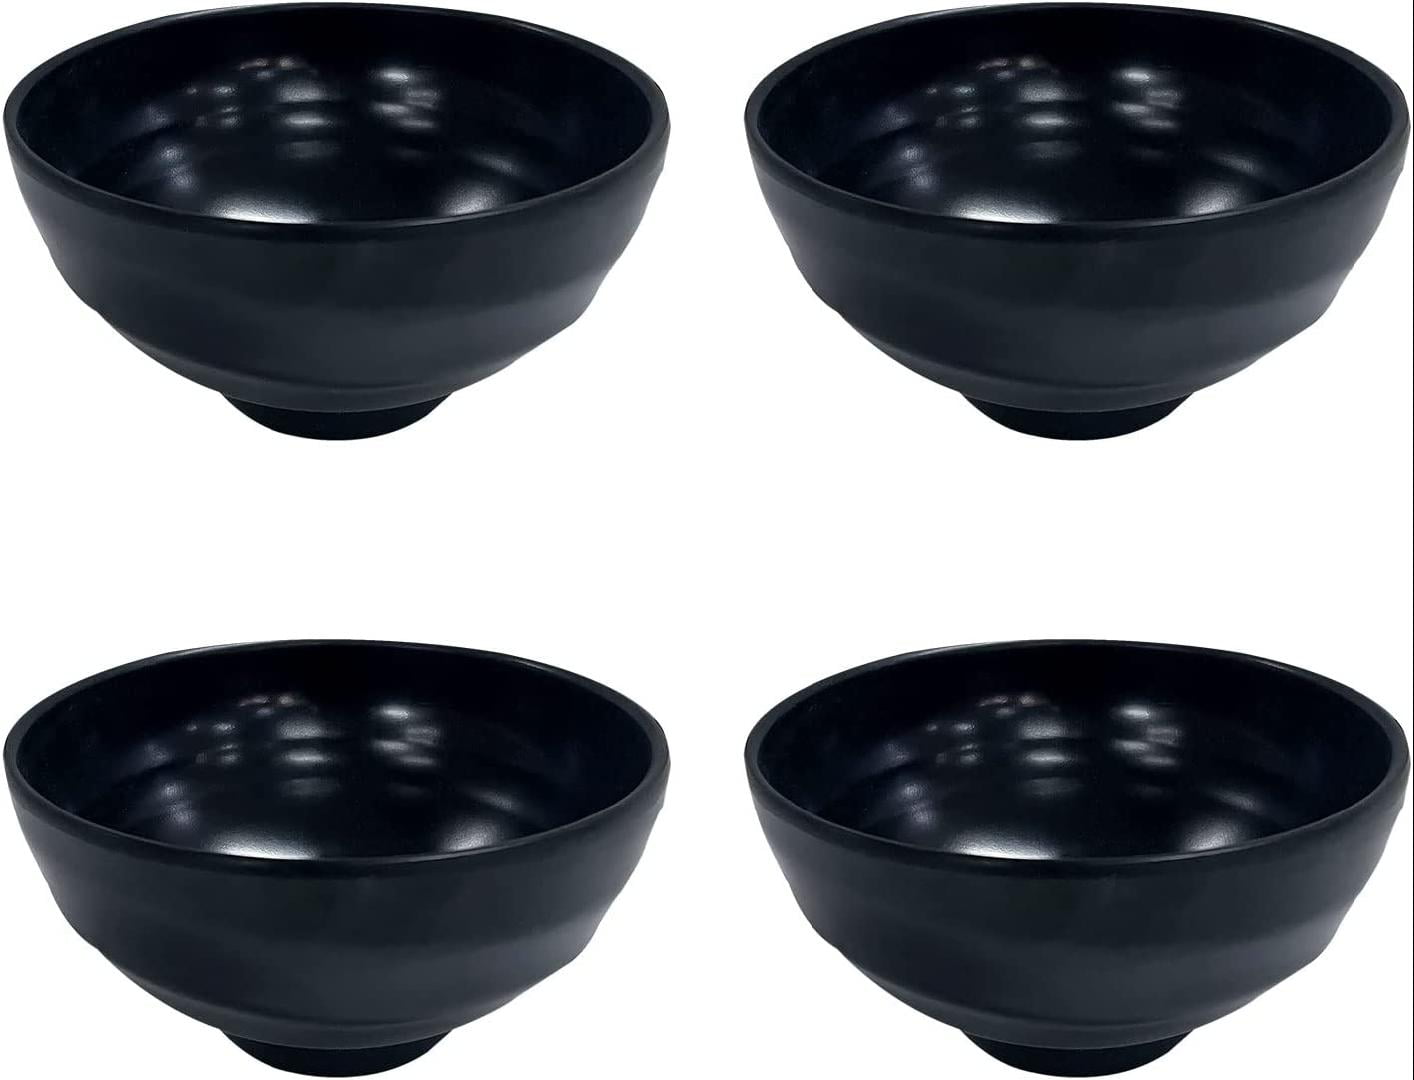 BESTONZON 2pcs Black Melamine Sauce Cups Reusable Sauce Container Small  Dipping Bowl for Restaurant Home 